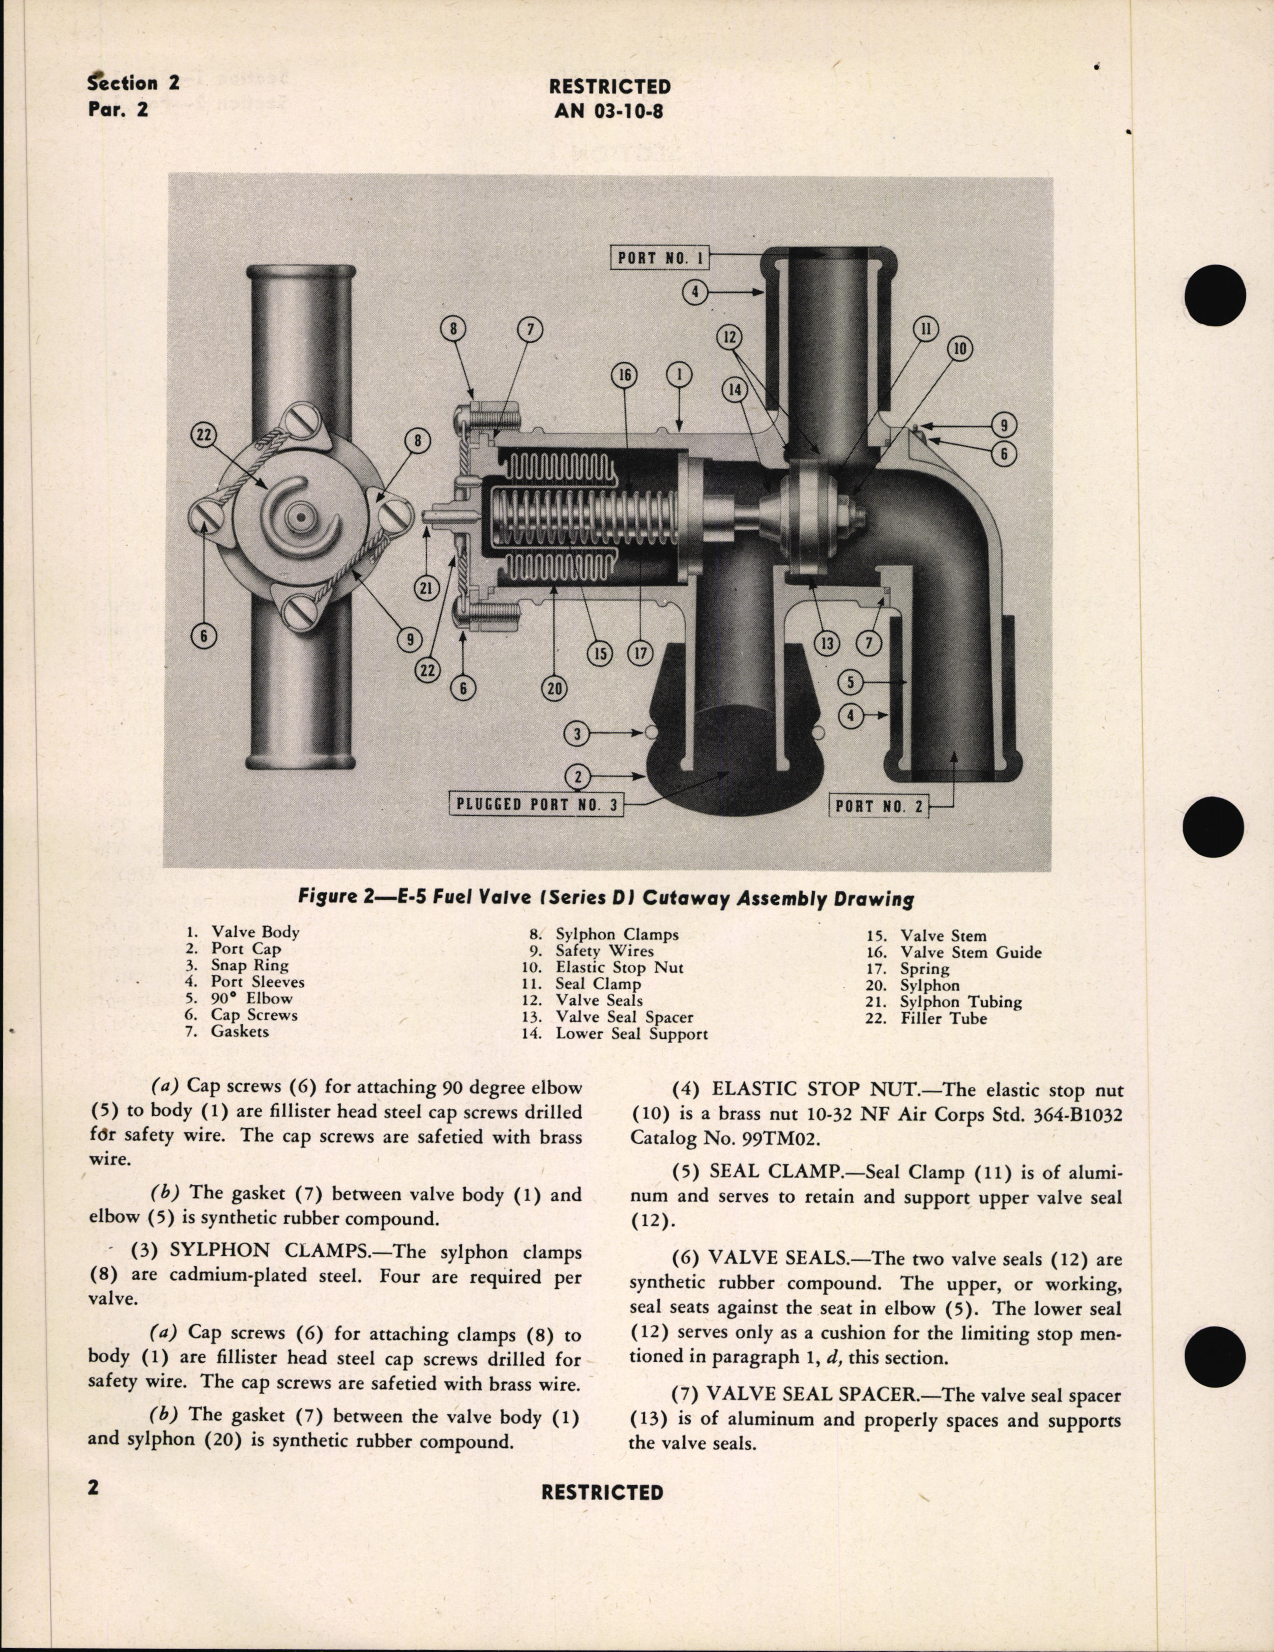 Sample page 6 from AirCorps Library document: Handbook of Instructions with Parts Catalog for Type E-5 (Series D) Fuel Valve